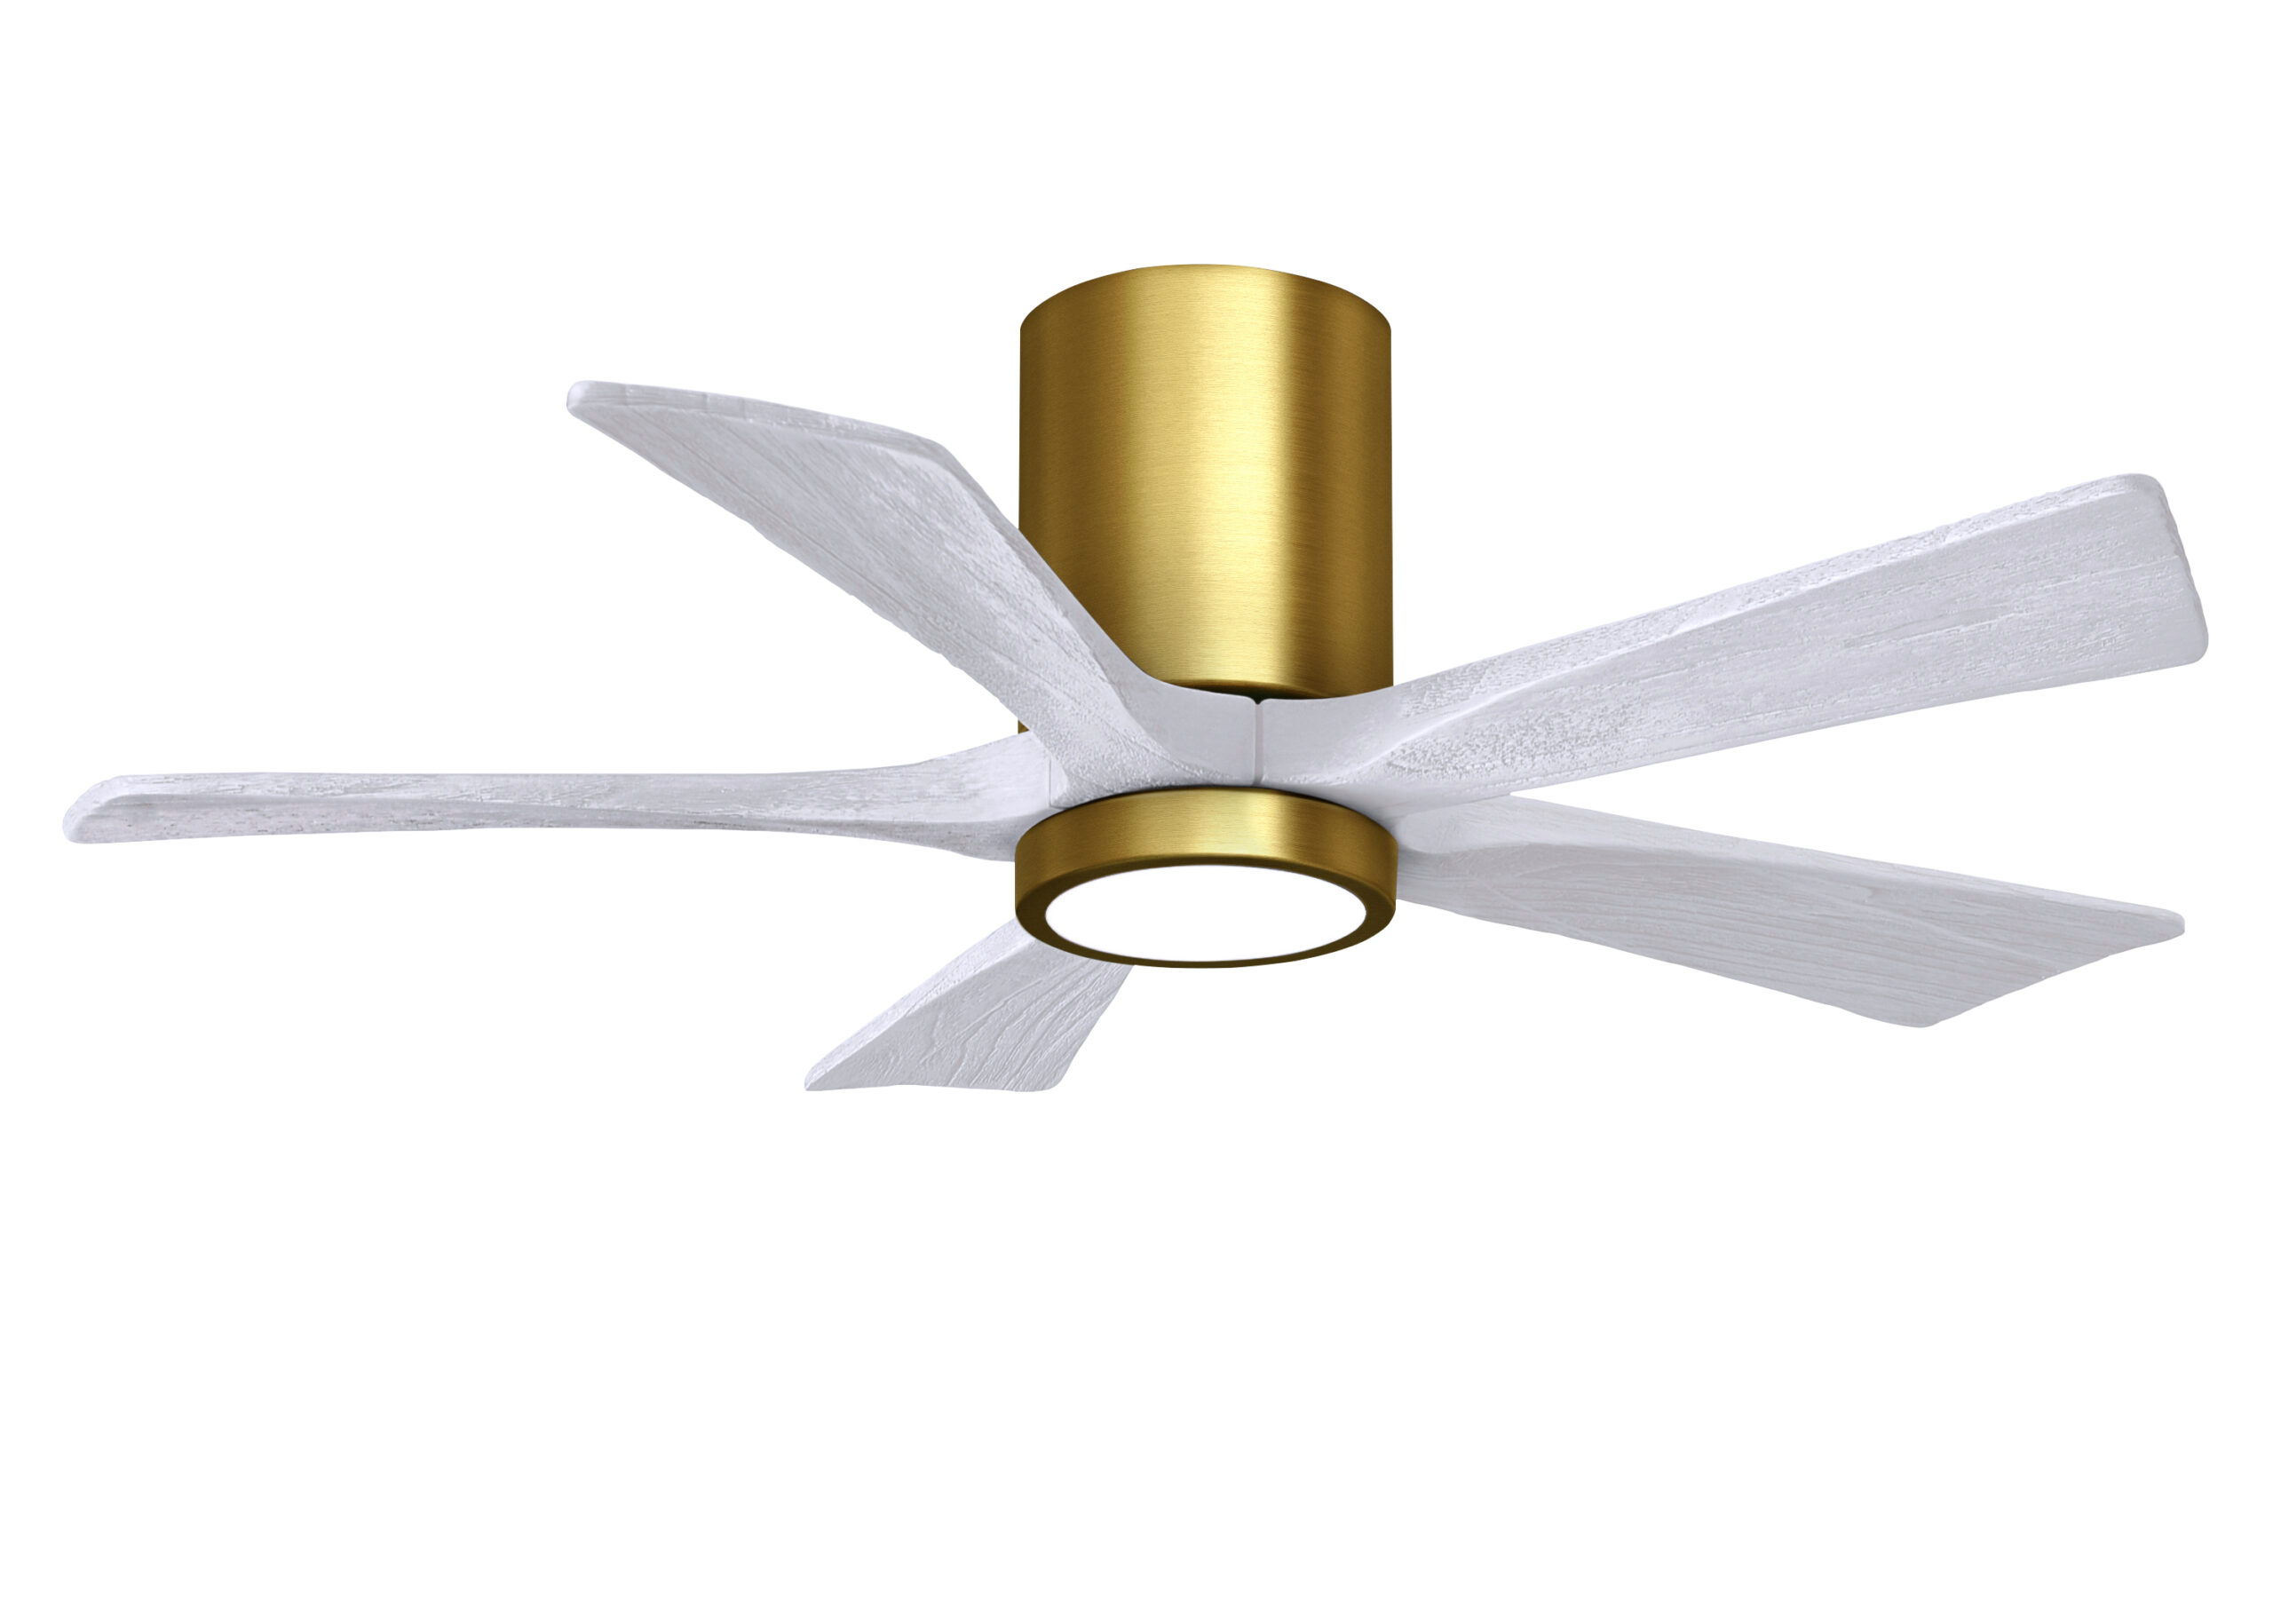 Irene-5HLK Ceiling Fan in Brushed Brass Finish with 42